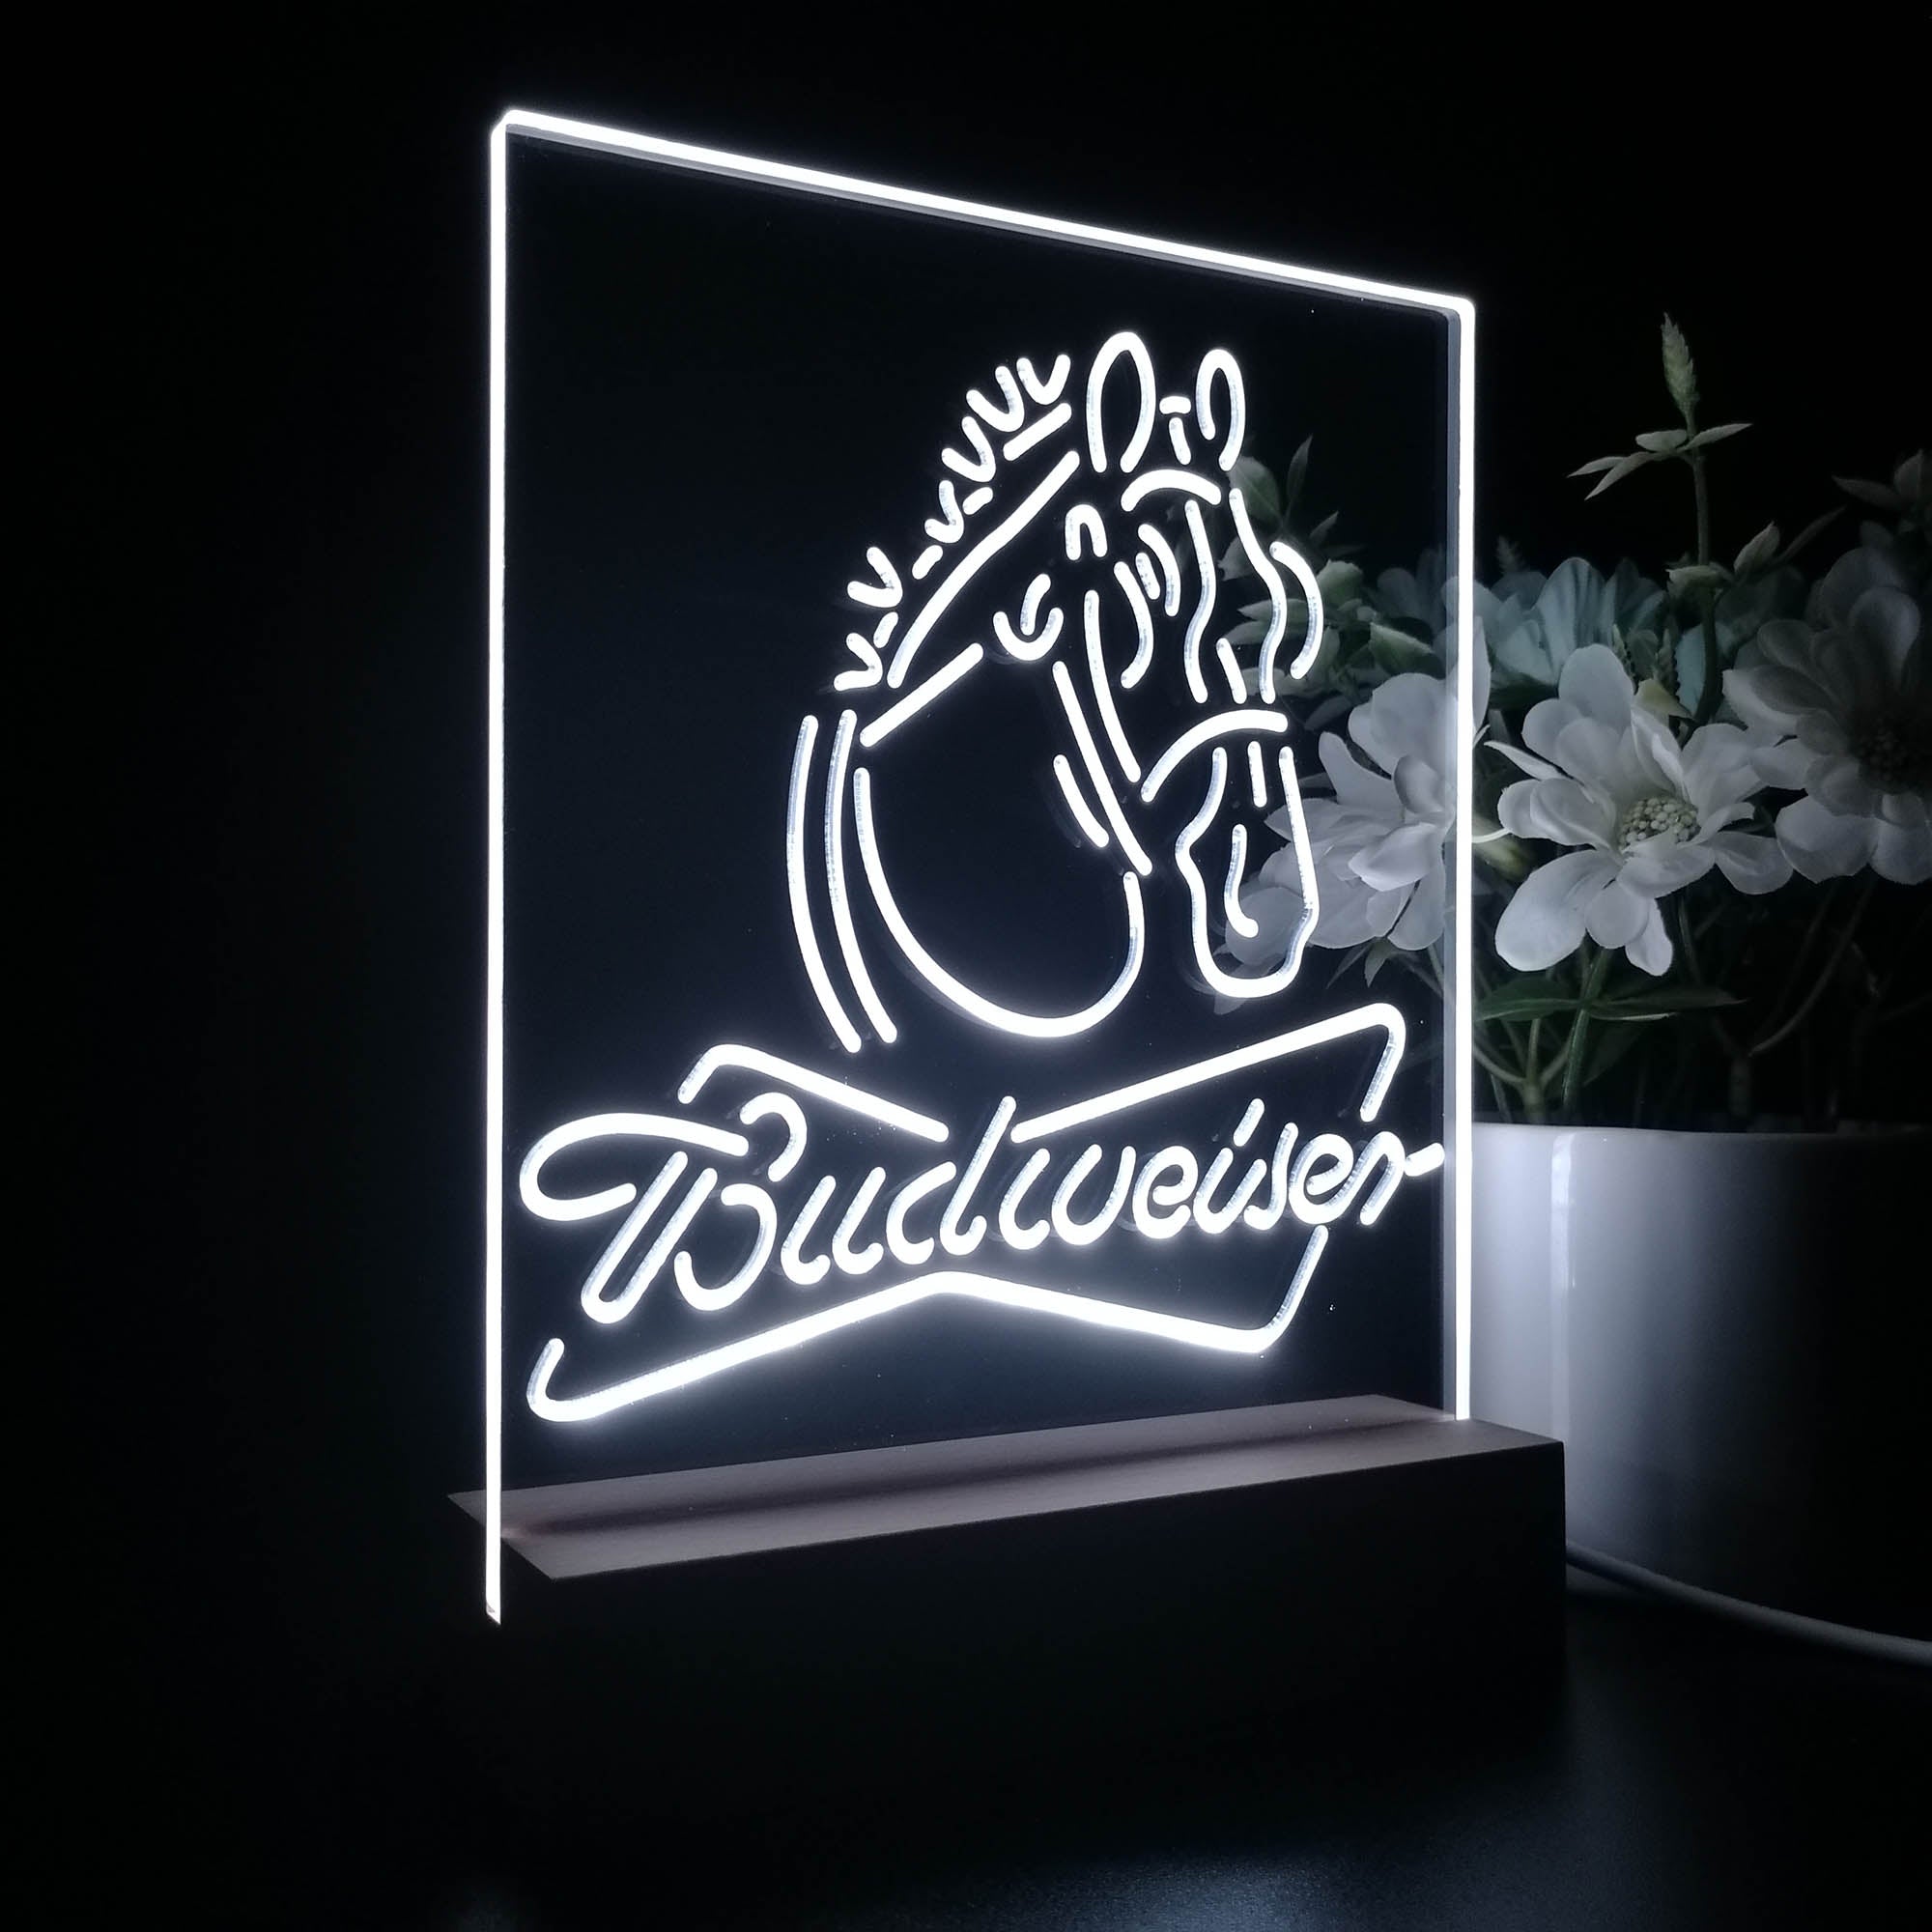 Budweiser Clydesdale Horse Head Night Light LED Sign